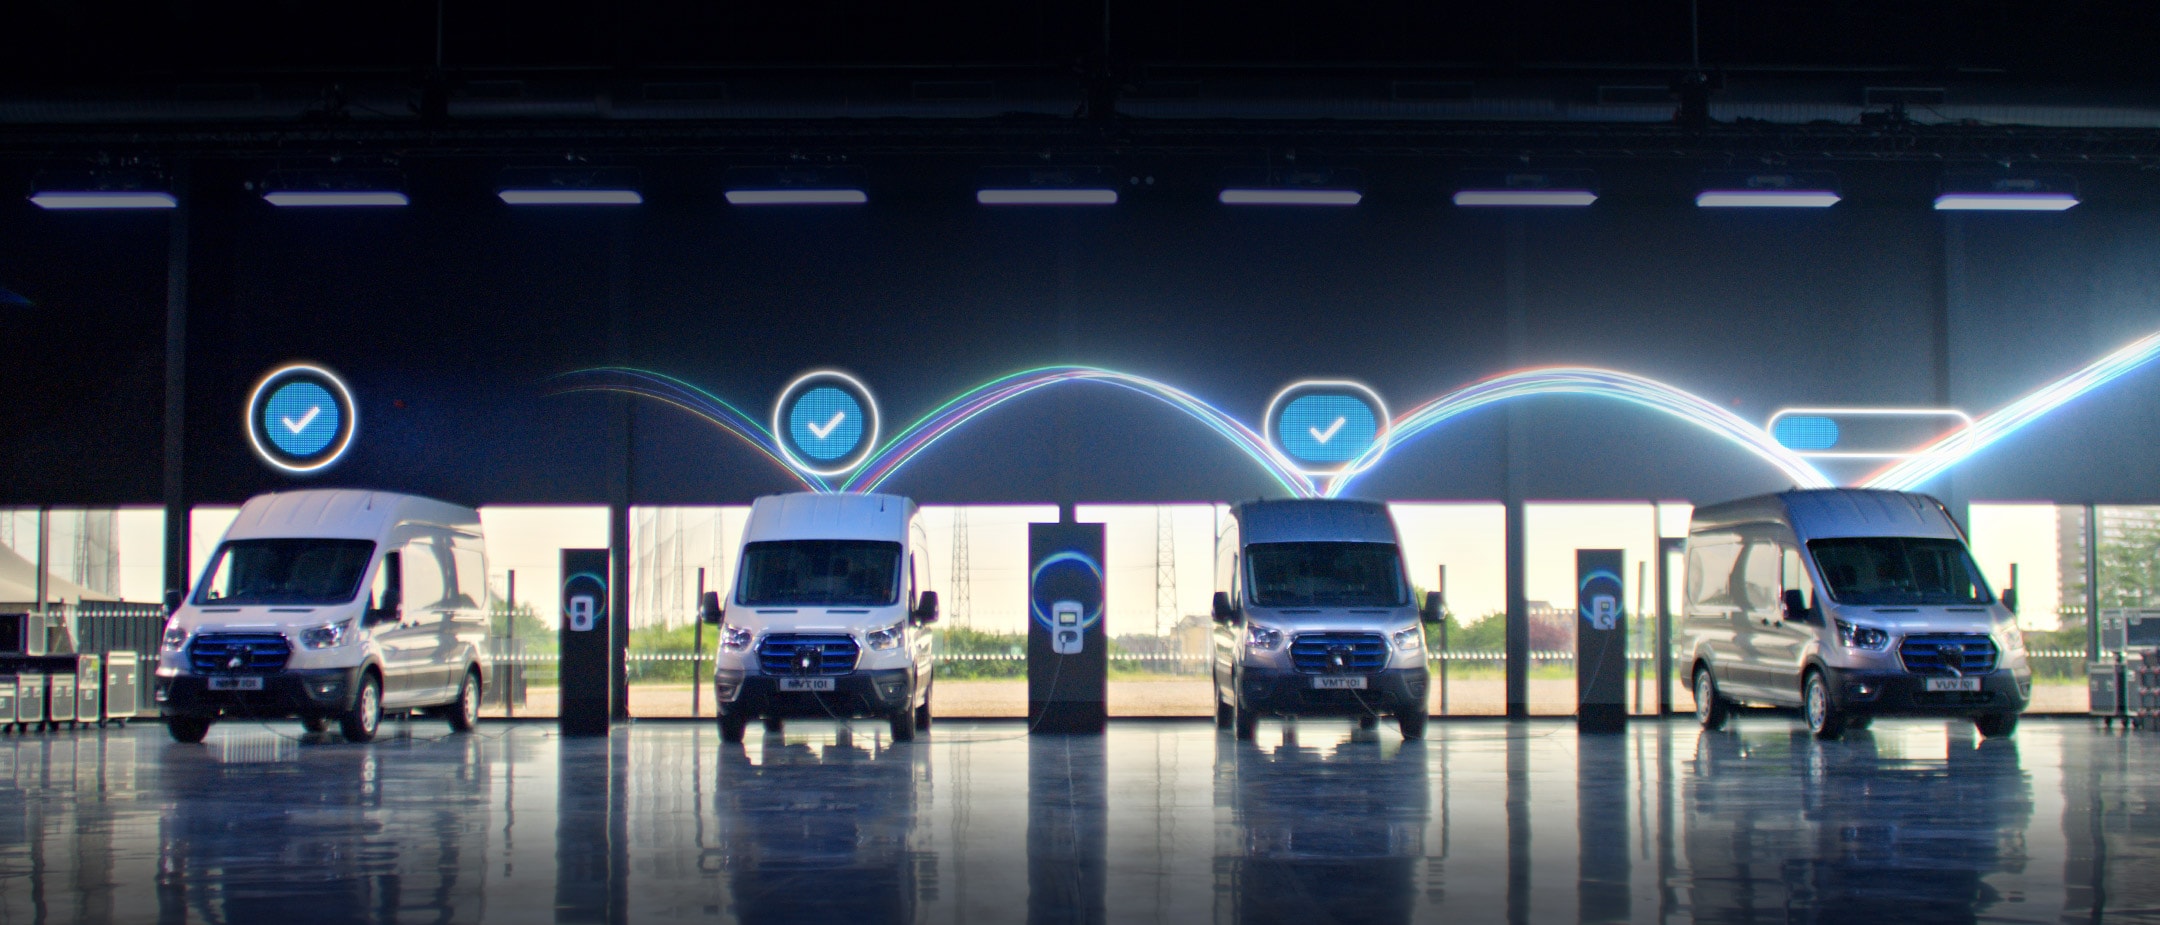 Ford Commercial Vehicles